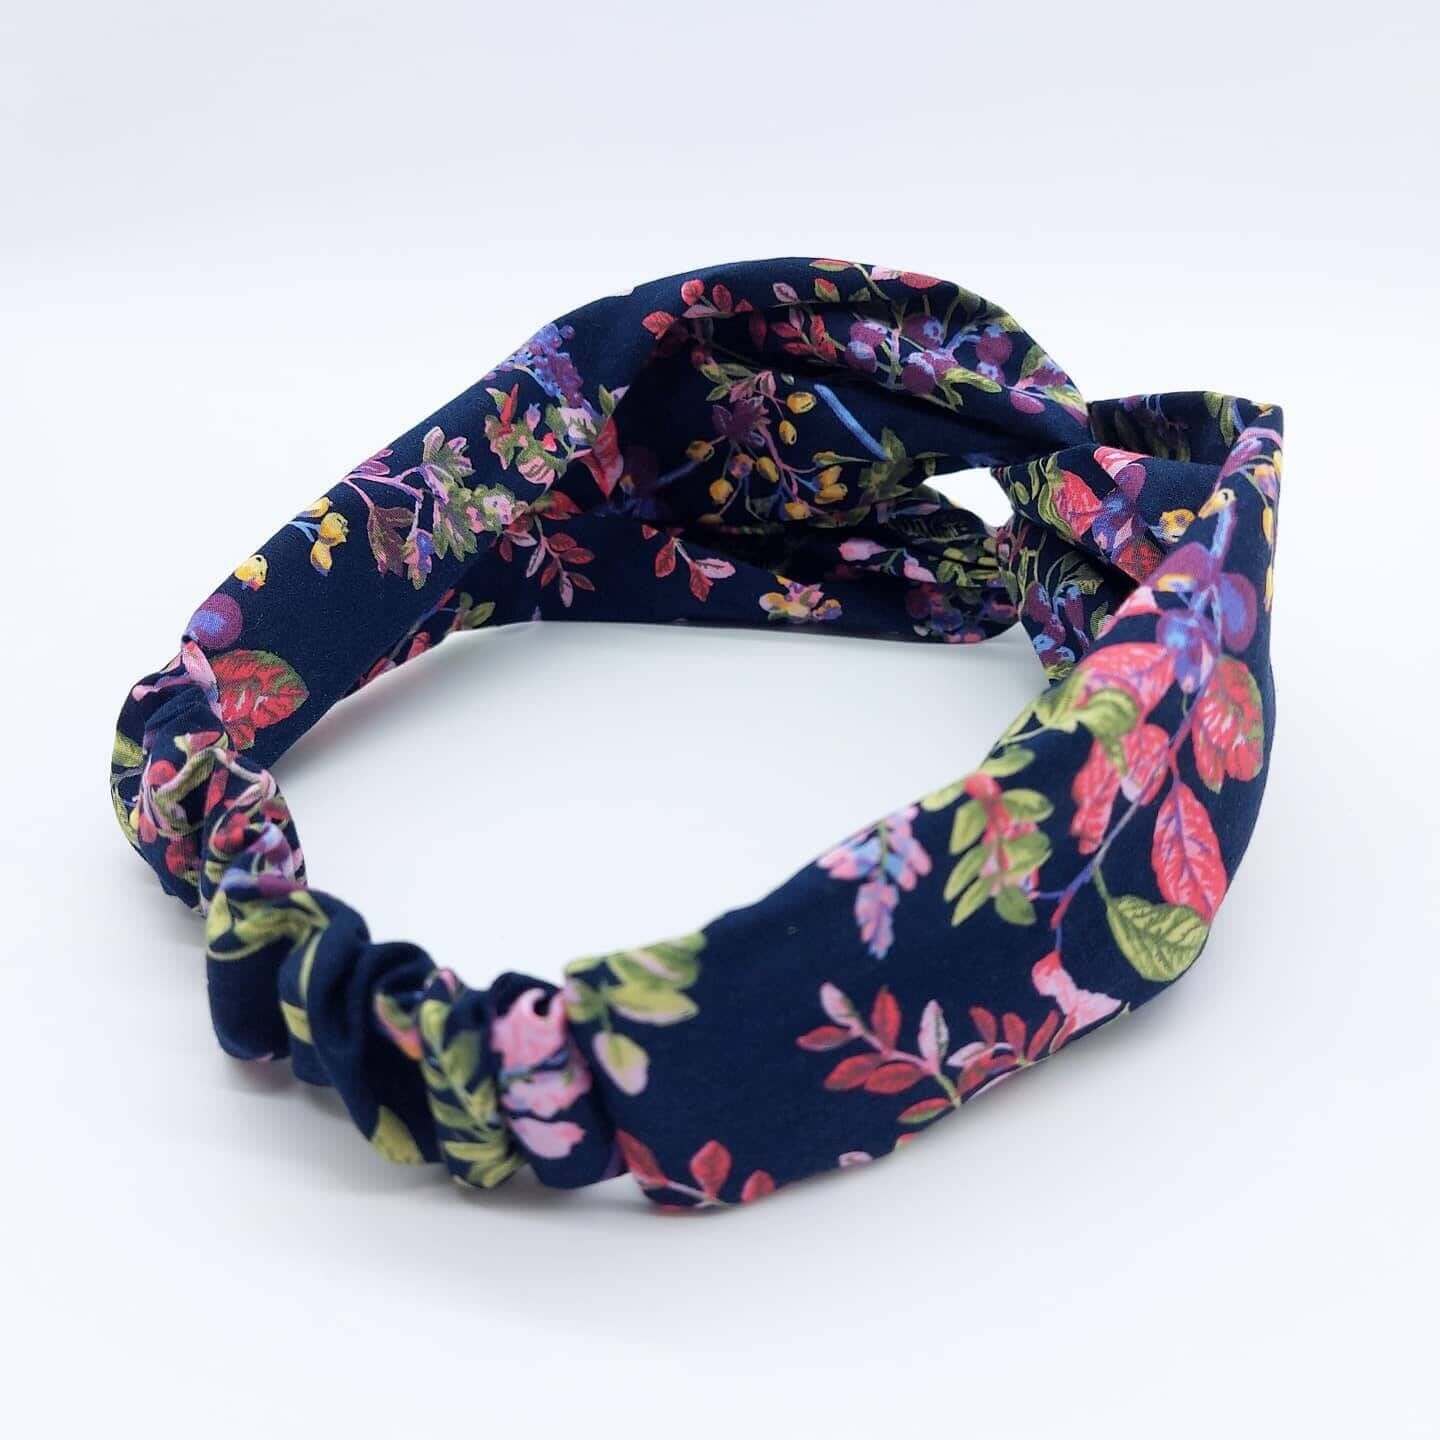 A pretty navy blue cotton, floral print turban twist headband with an elasticated panel at the back.